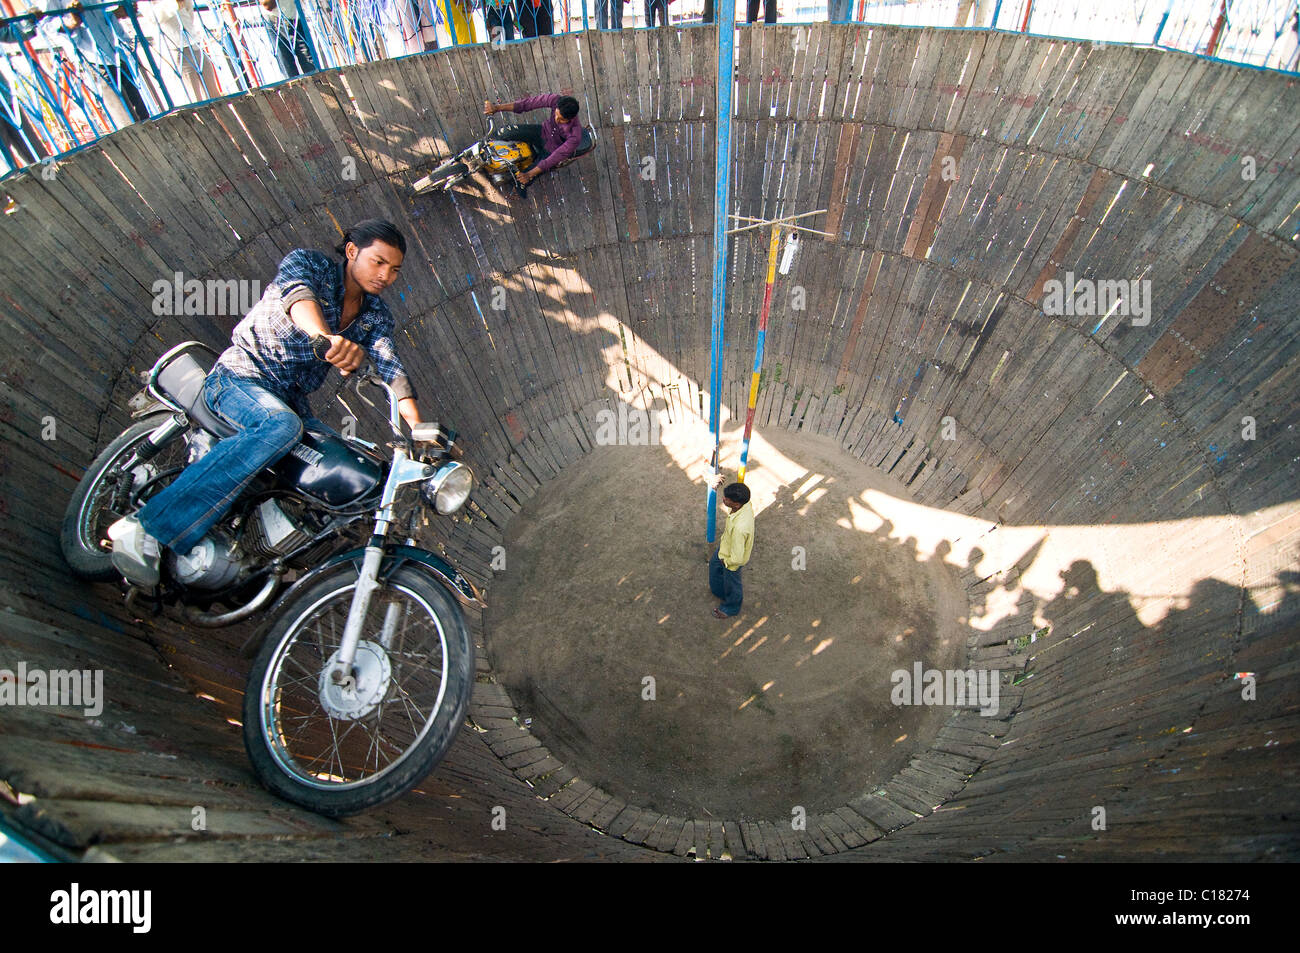 Indian bikers perform stunts on a show in a colorful fair in Bihar. Stock Photo